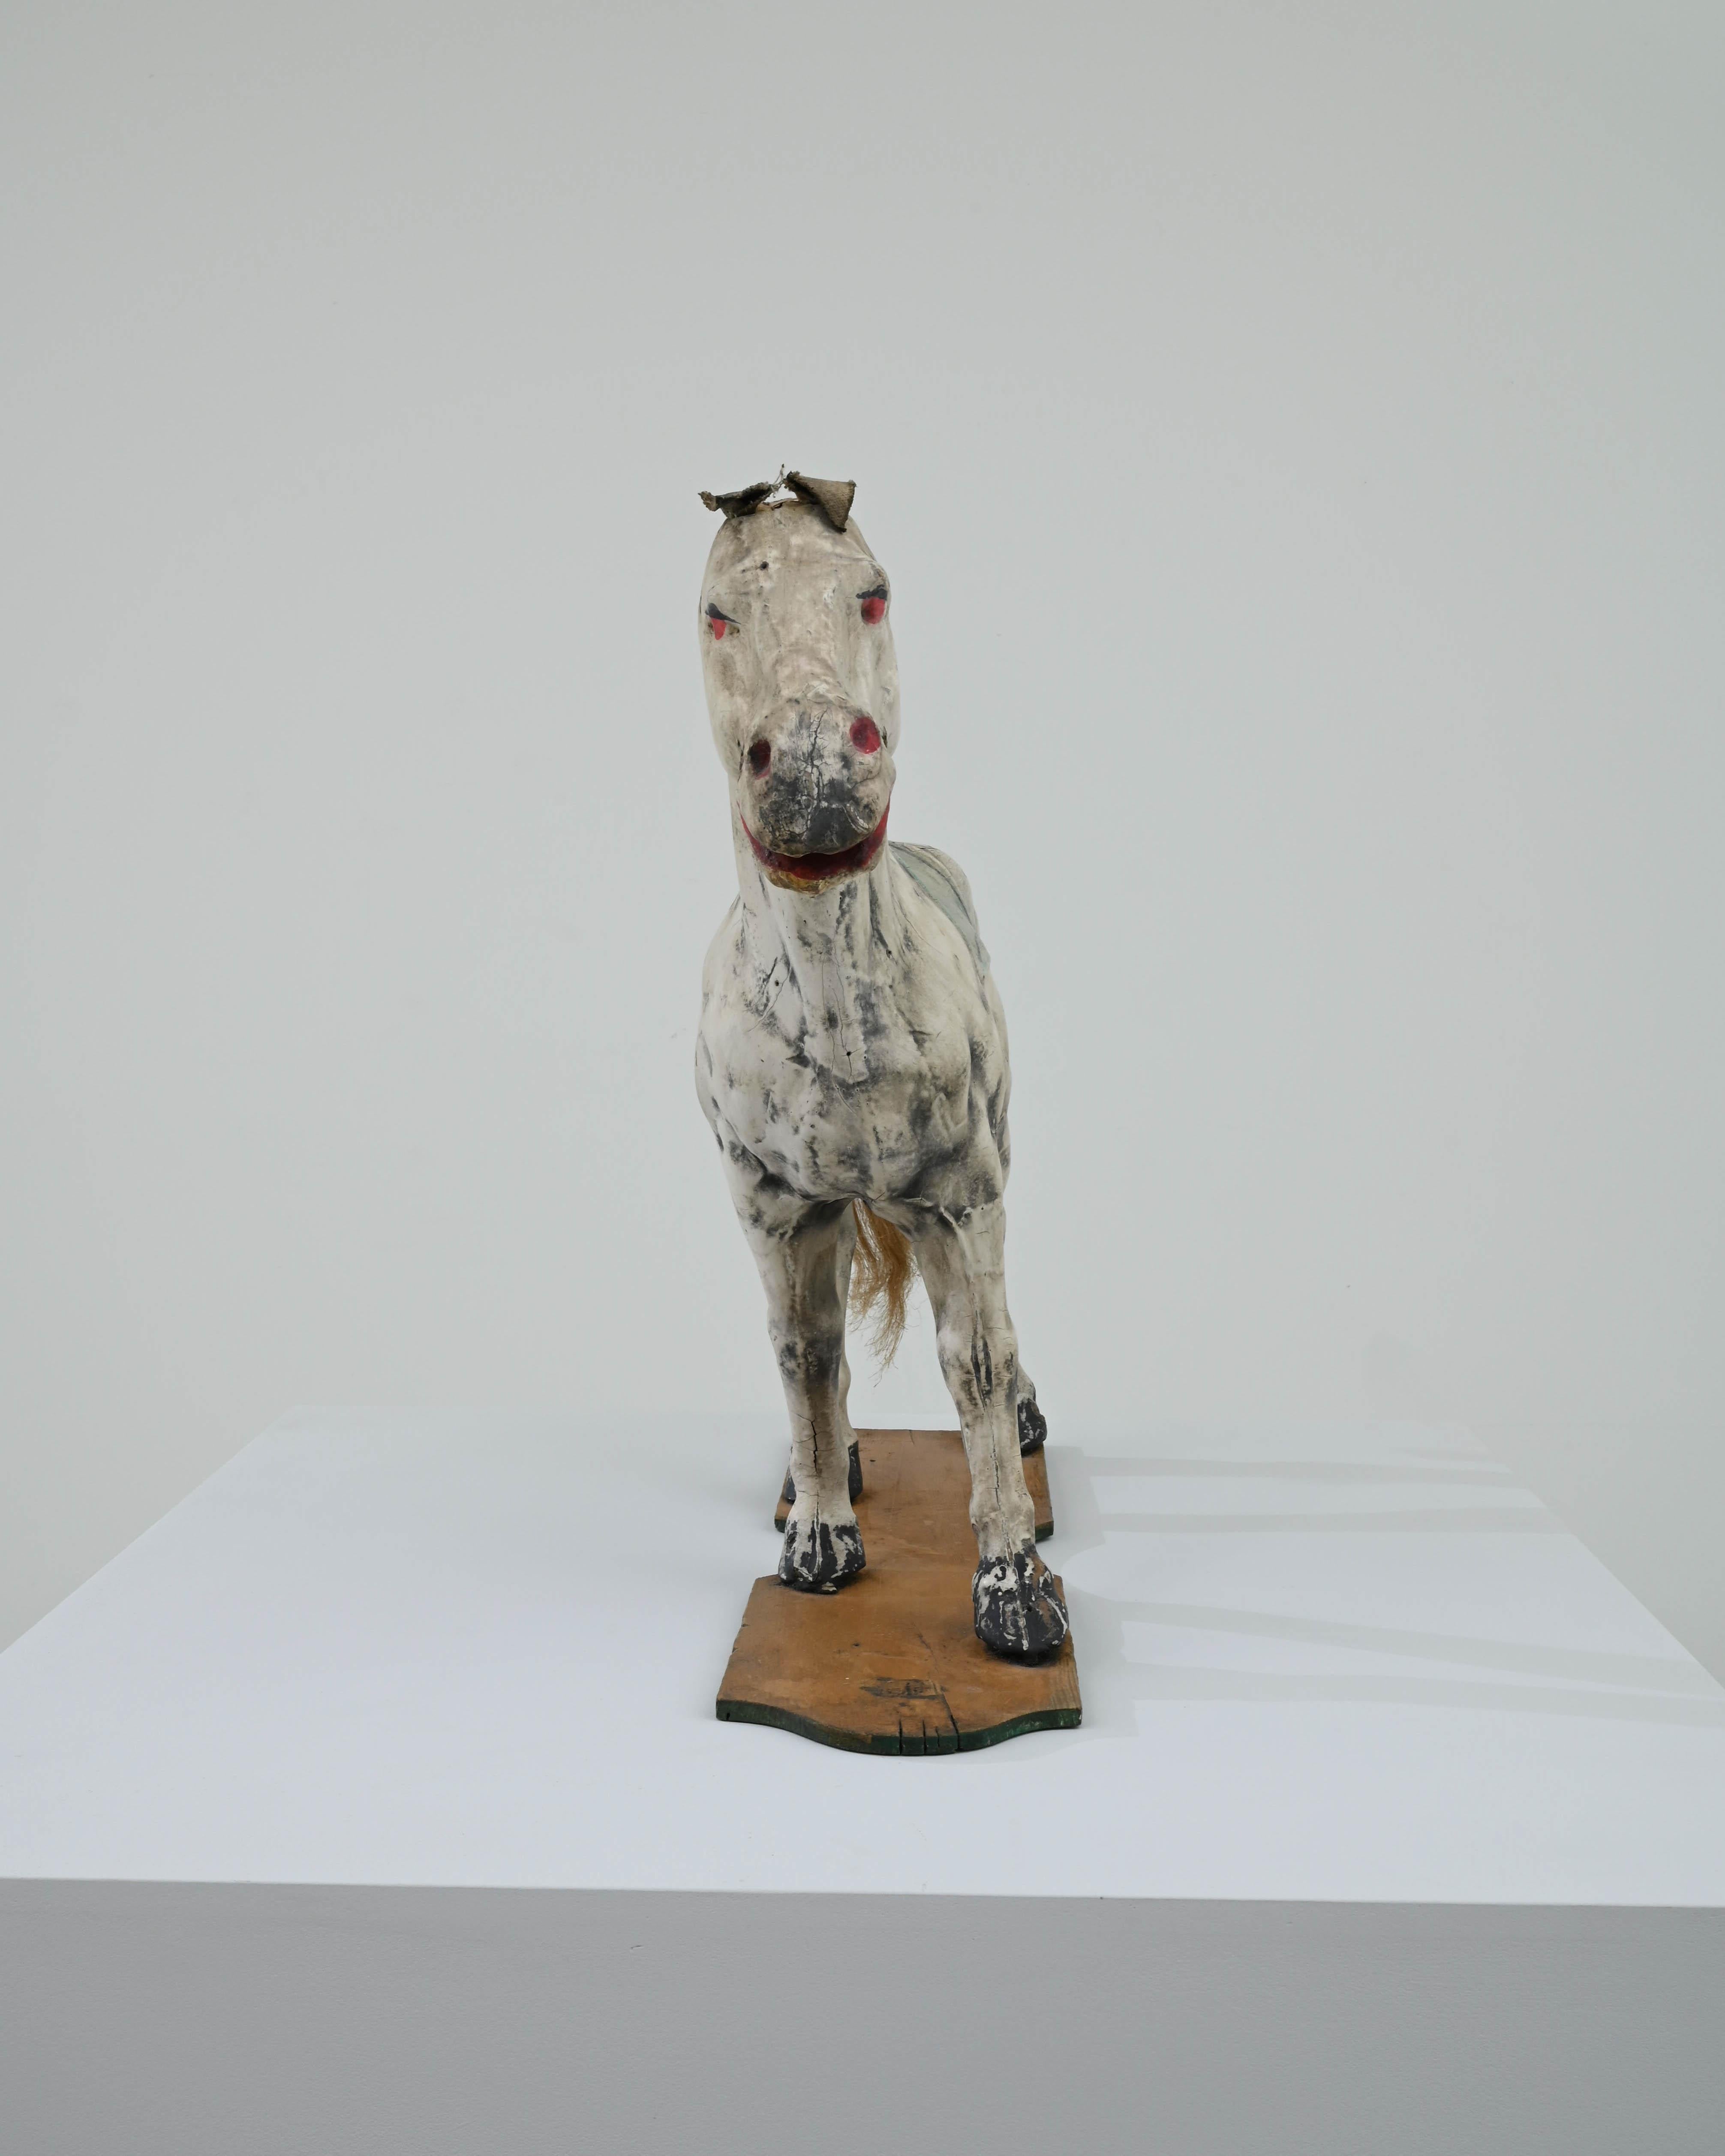 A wooden decorative sculpture of a horse created in early 20th century France. Playfully painted, and caught mid-pose, this charming horse exudes a sense of gracefully decorative flair. The posture of the horse communicates a contrapposto pose, as